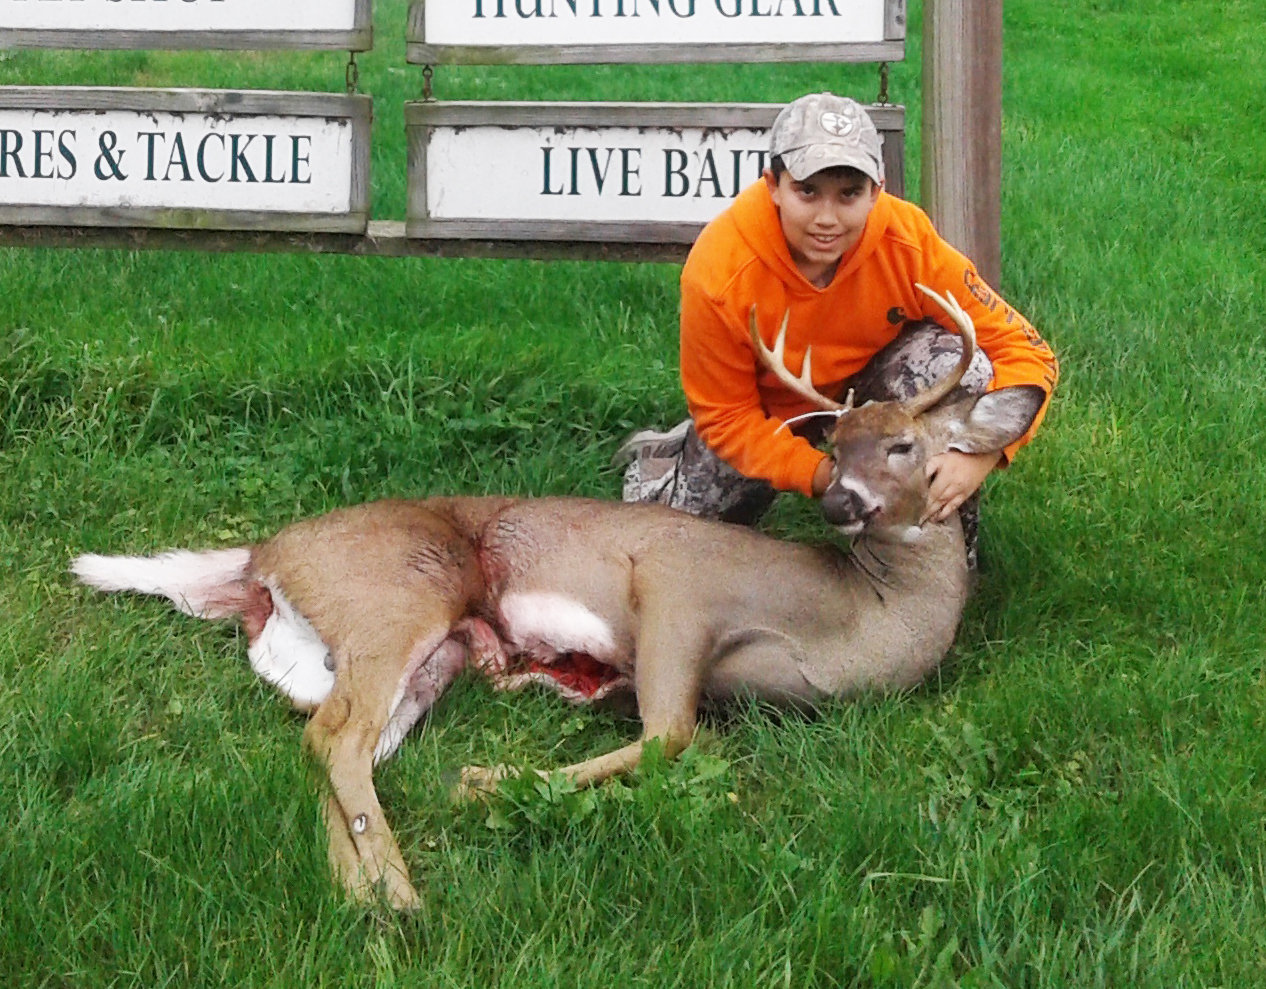 Jeffersonville resident Ryder Kratz brought in an 8-pointer that scored 190.25. The deer weighed 142 pounds.